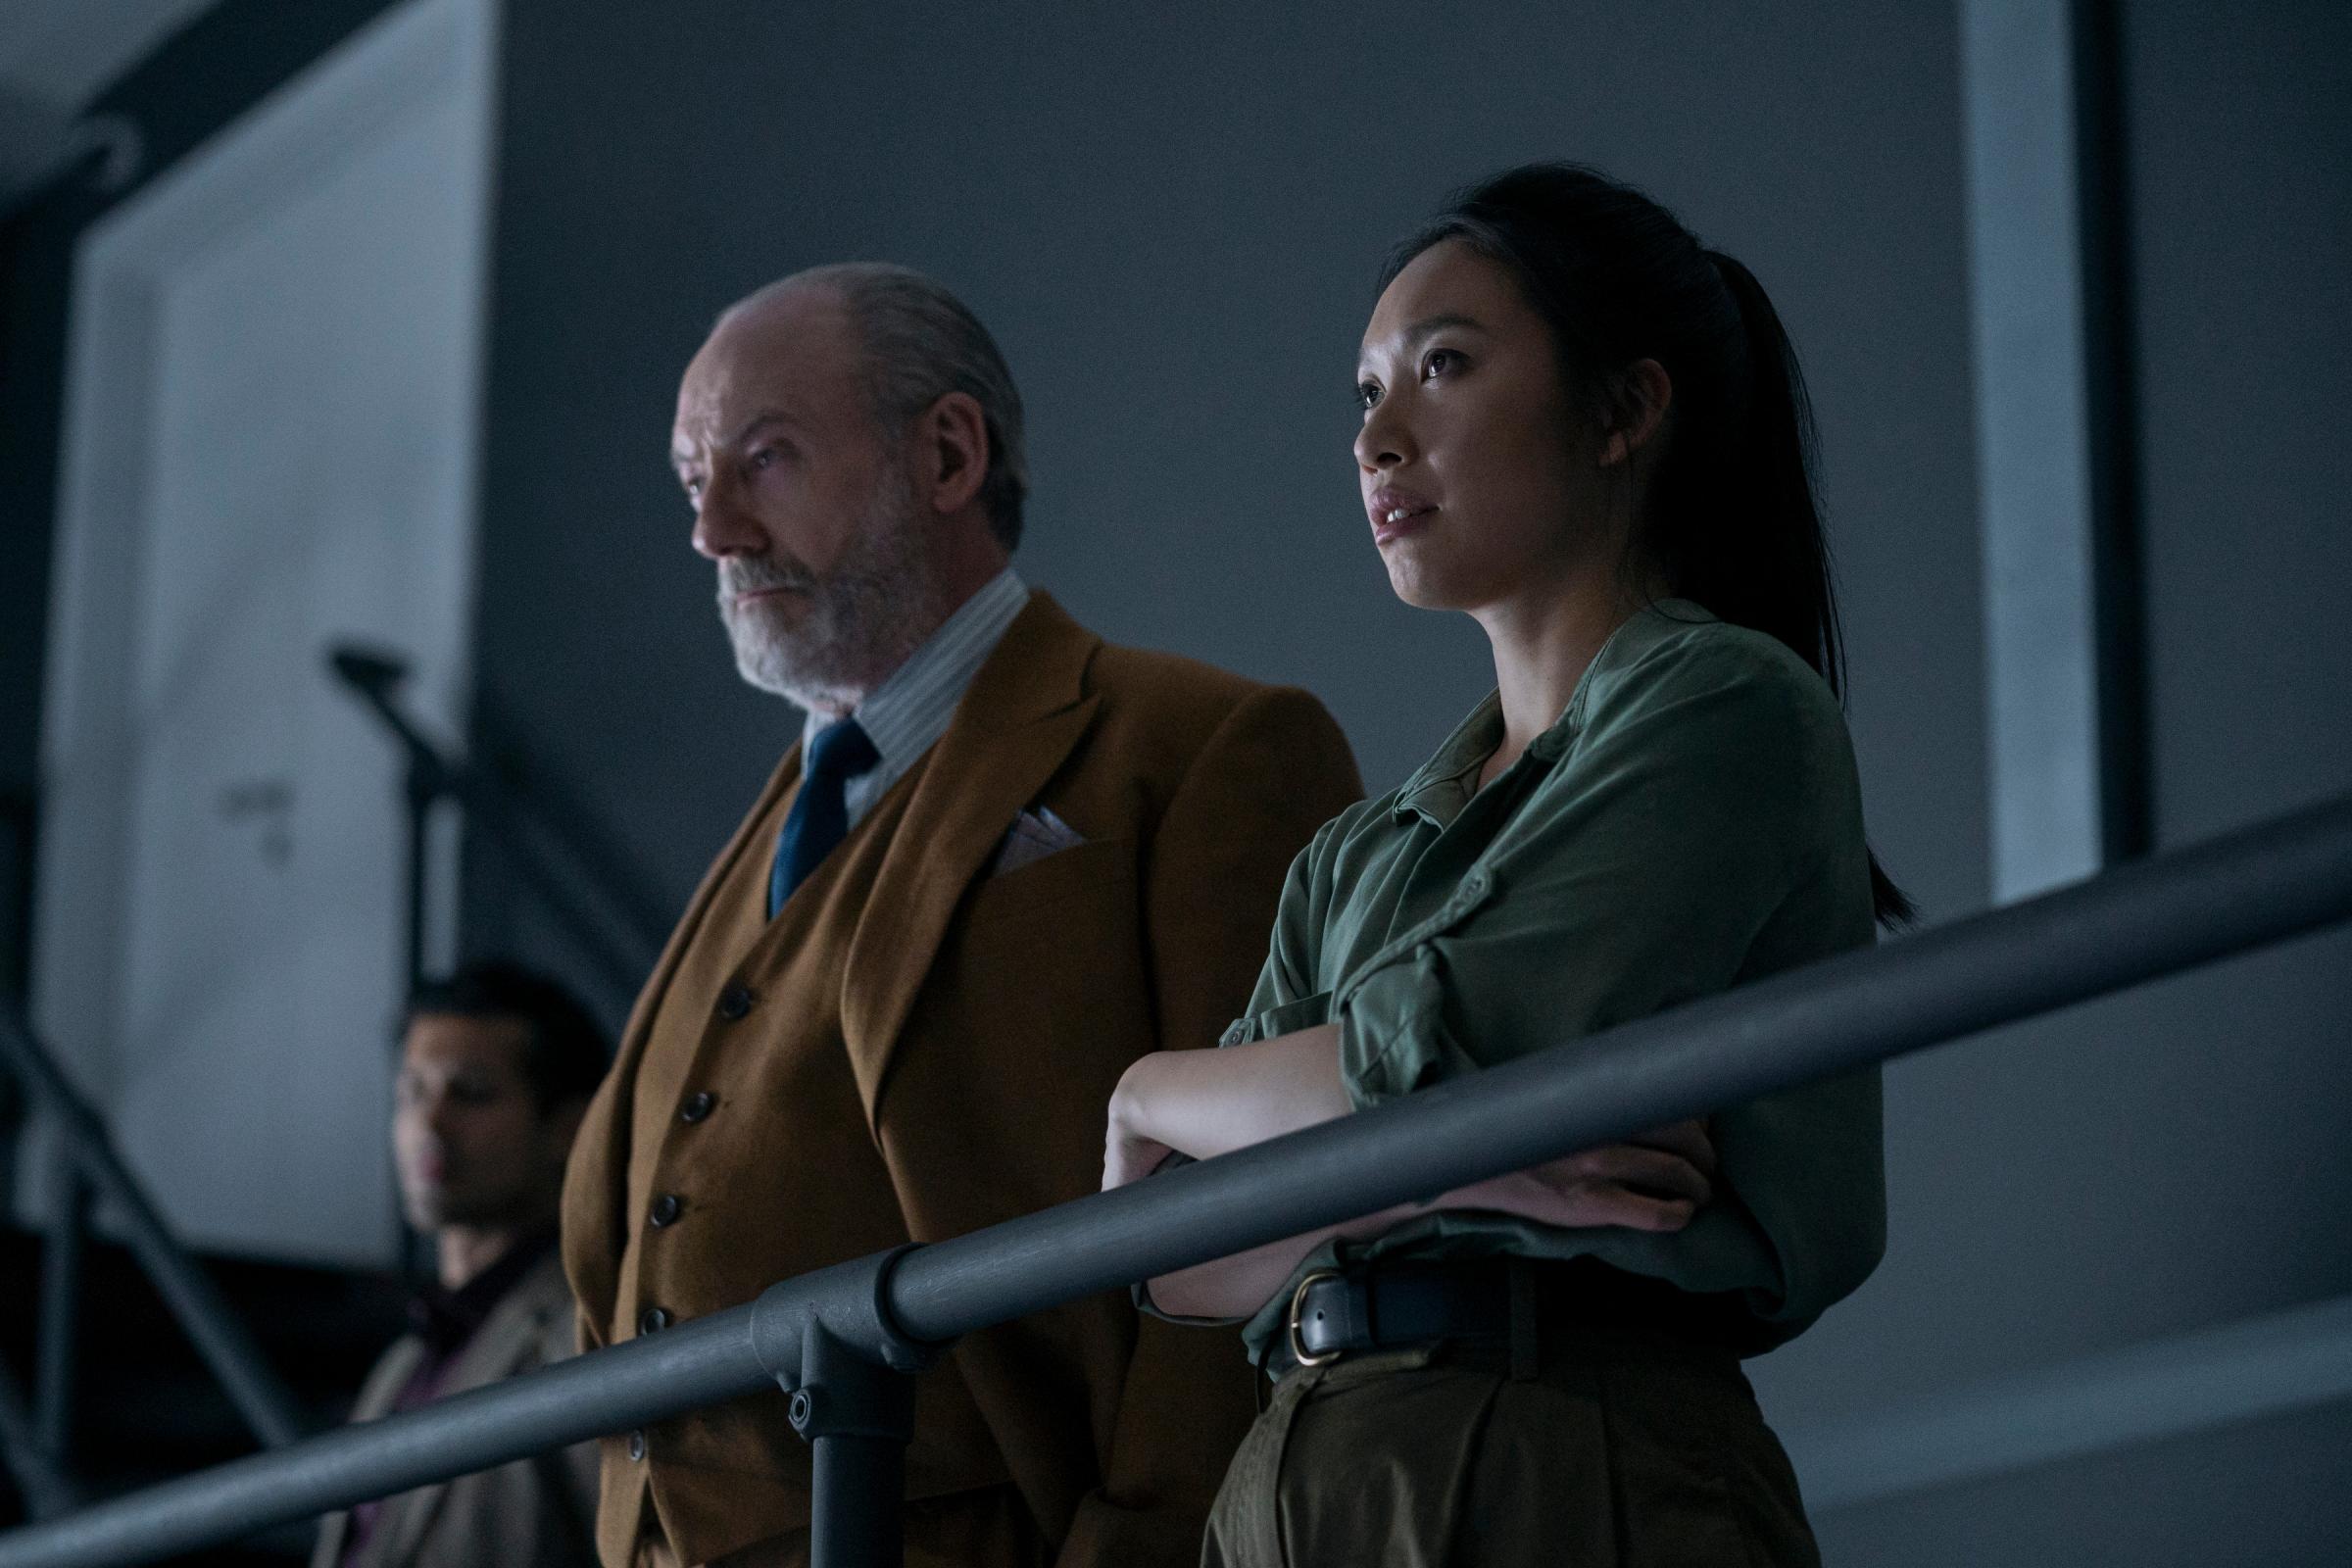 Liam Cunningham as Wade and Jess Hong as Jin in episode 8 of 3 Body Problem.